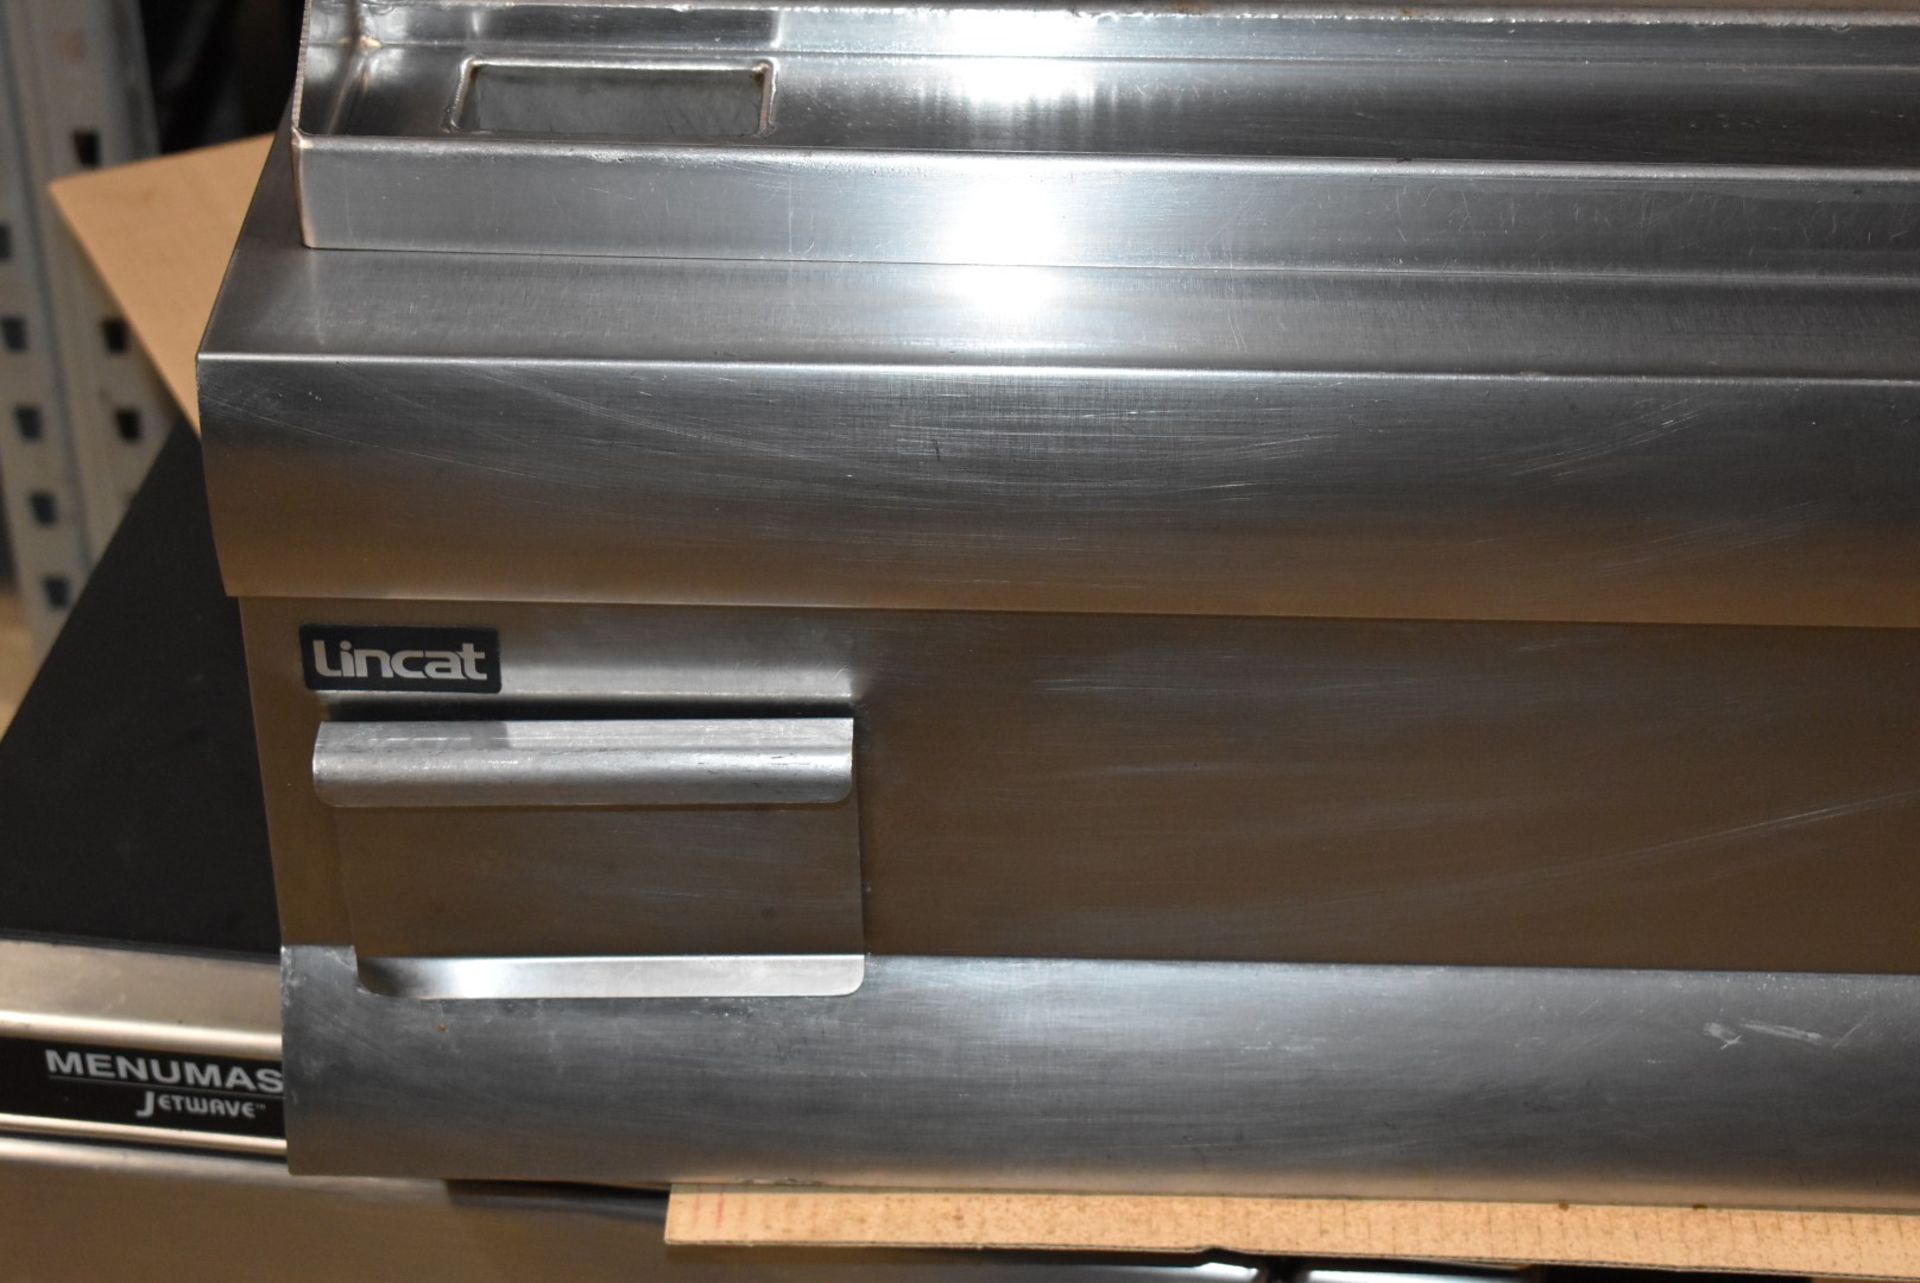 1 x Lincat Silverlink 900 GS9 Steel Top Griddle Cooker - RRP £875 - Ref: WH2-119 B3F - CL999 - 900mm - Image 4 of 11